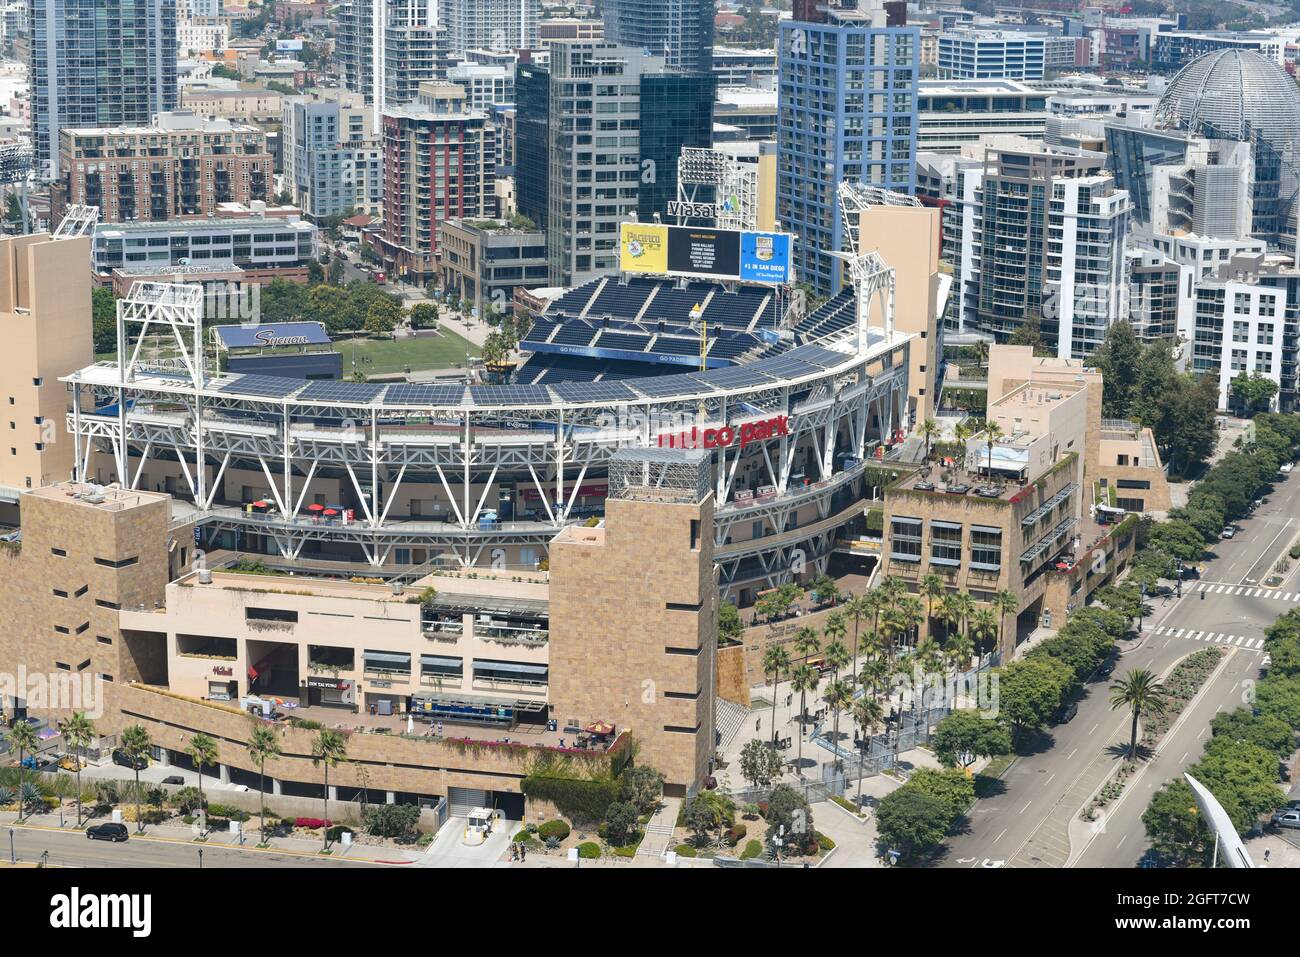 SAN DIEGO , CALIFORNIA - 25 AUG 2021: Petco Field, home of the San Diego Padres of the National League West Division of Major League Baseball. Stock Photo